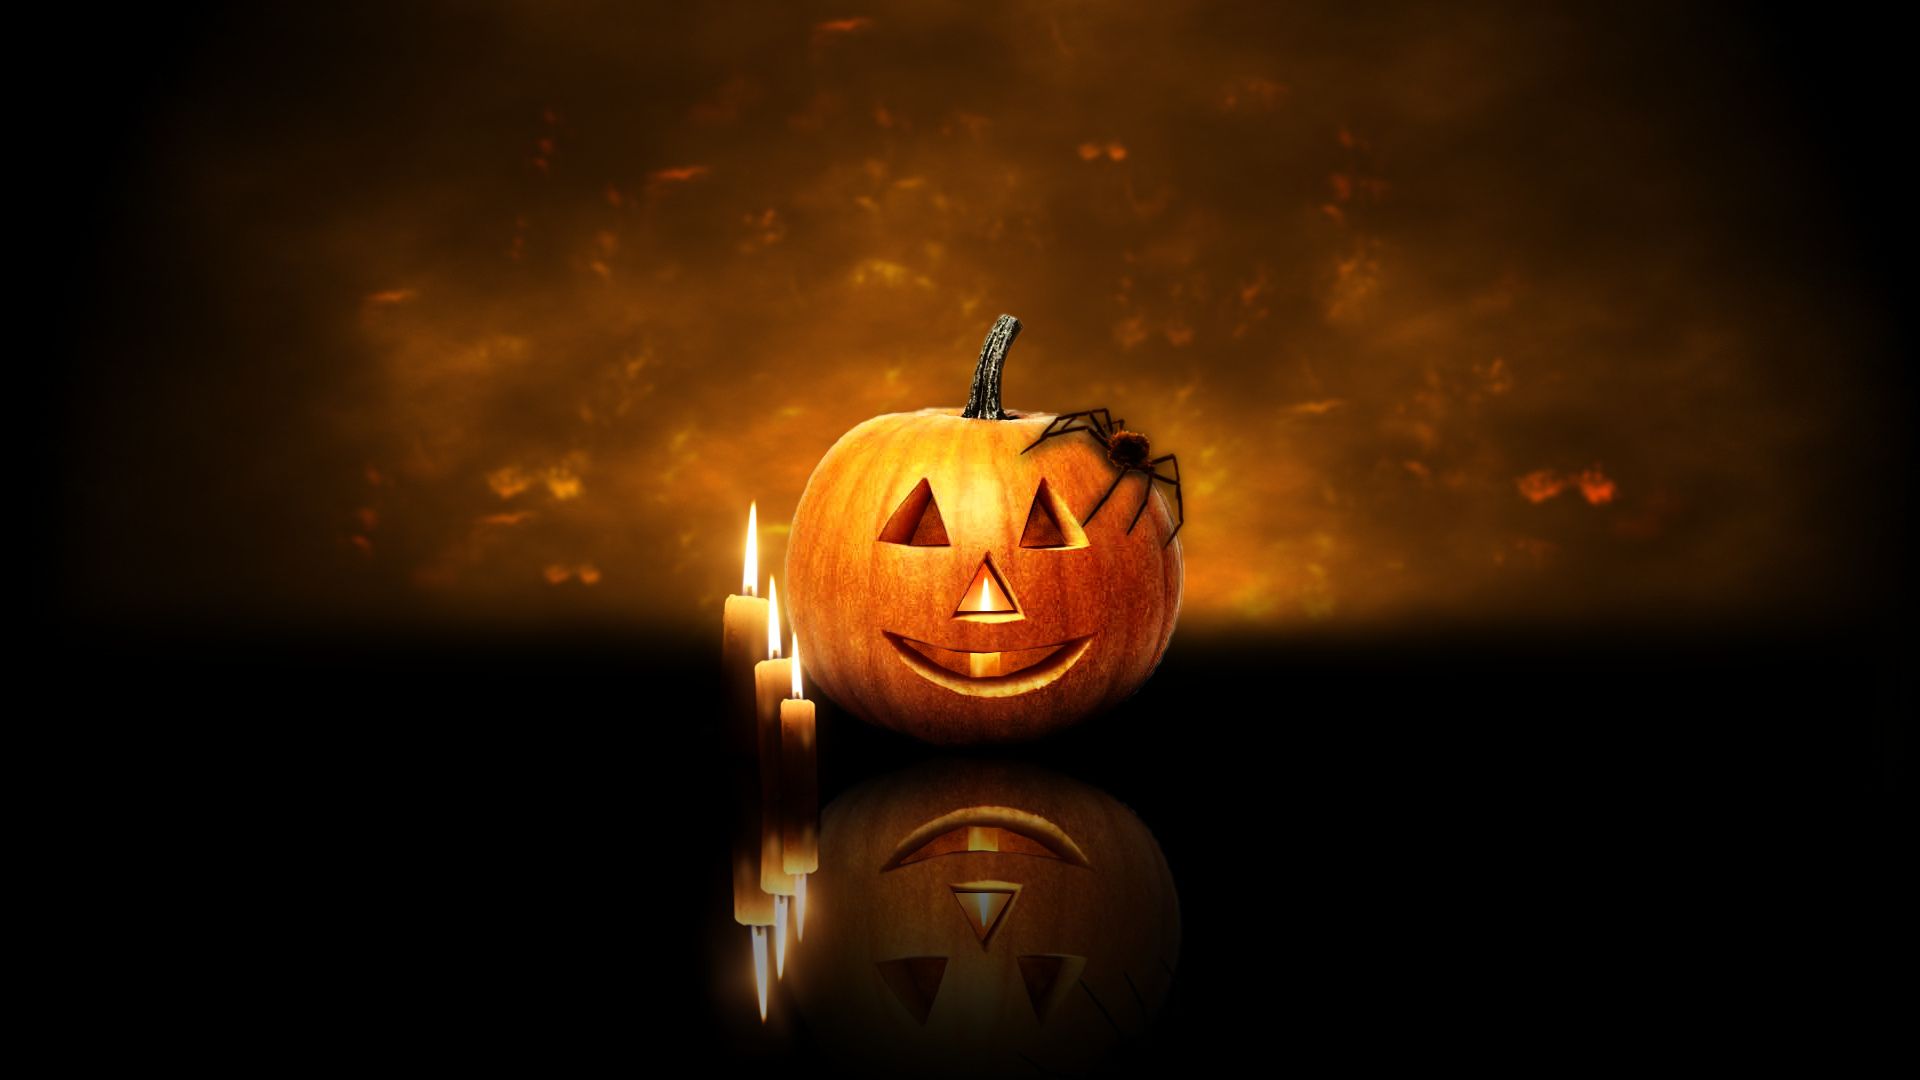 Pumpkin 4K wallpaper for your desktop or mobile screen free and easy to download